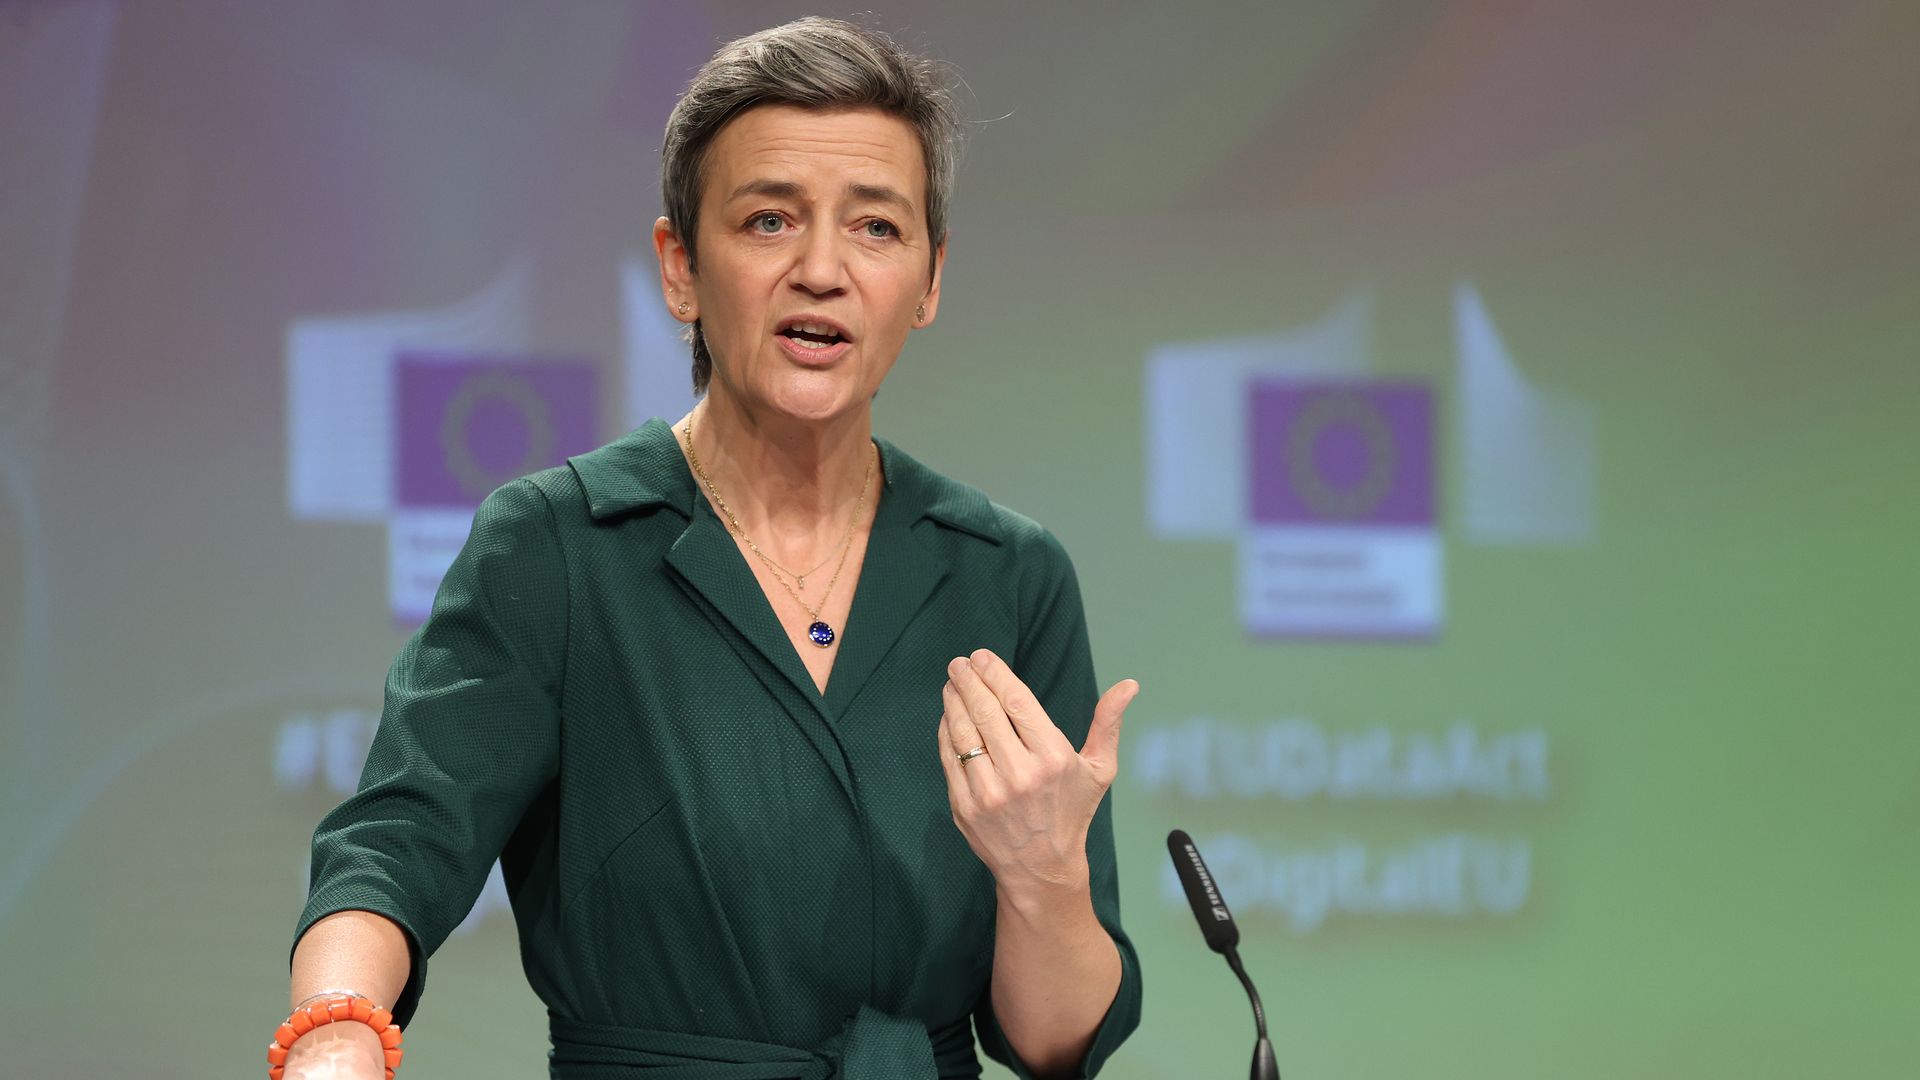 European Commission Executive Vice-President Margrethe Vestager in a green dress speaking at a podium